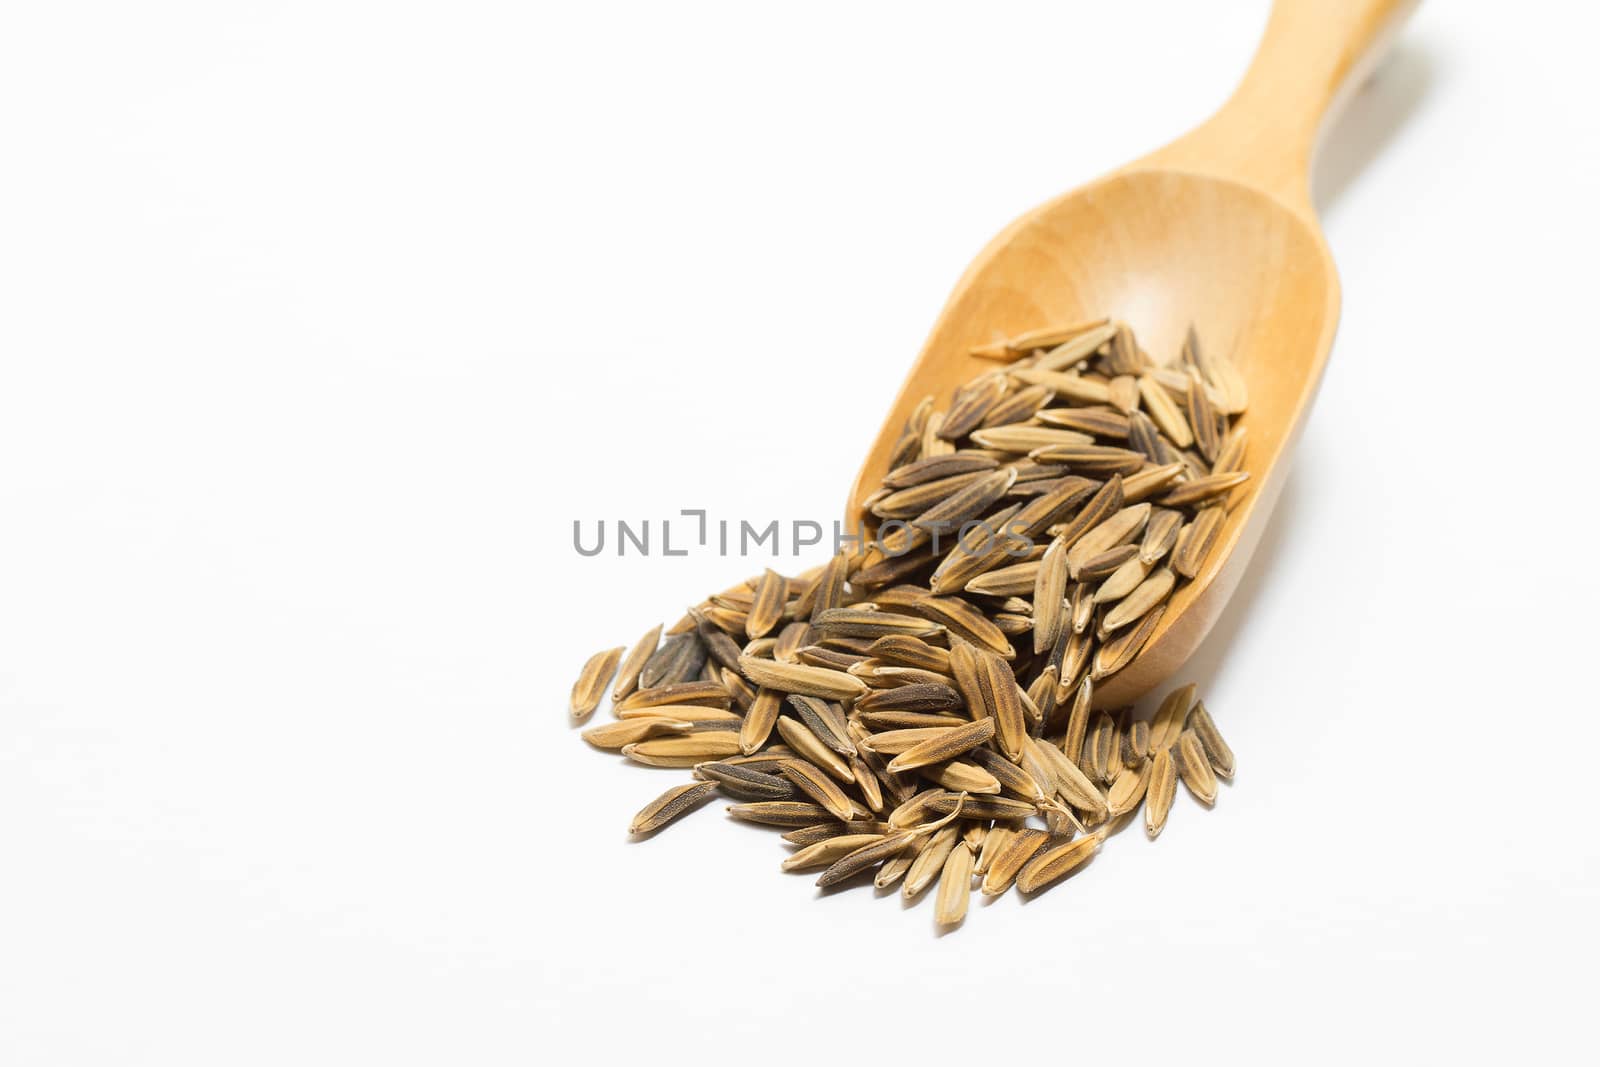 Paddy in the wooden spoon on a white background by TakerWalker